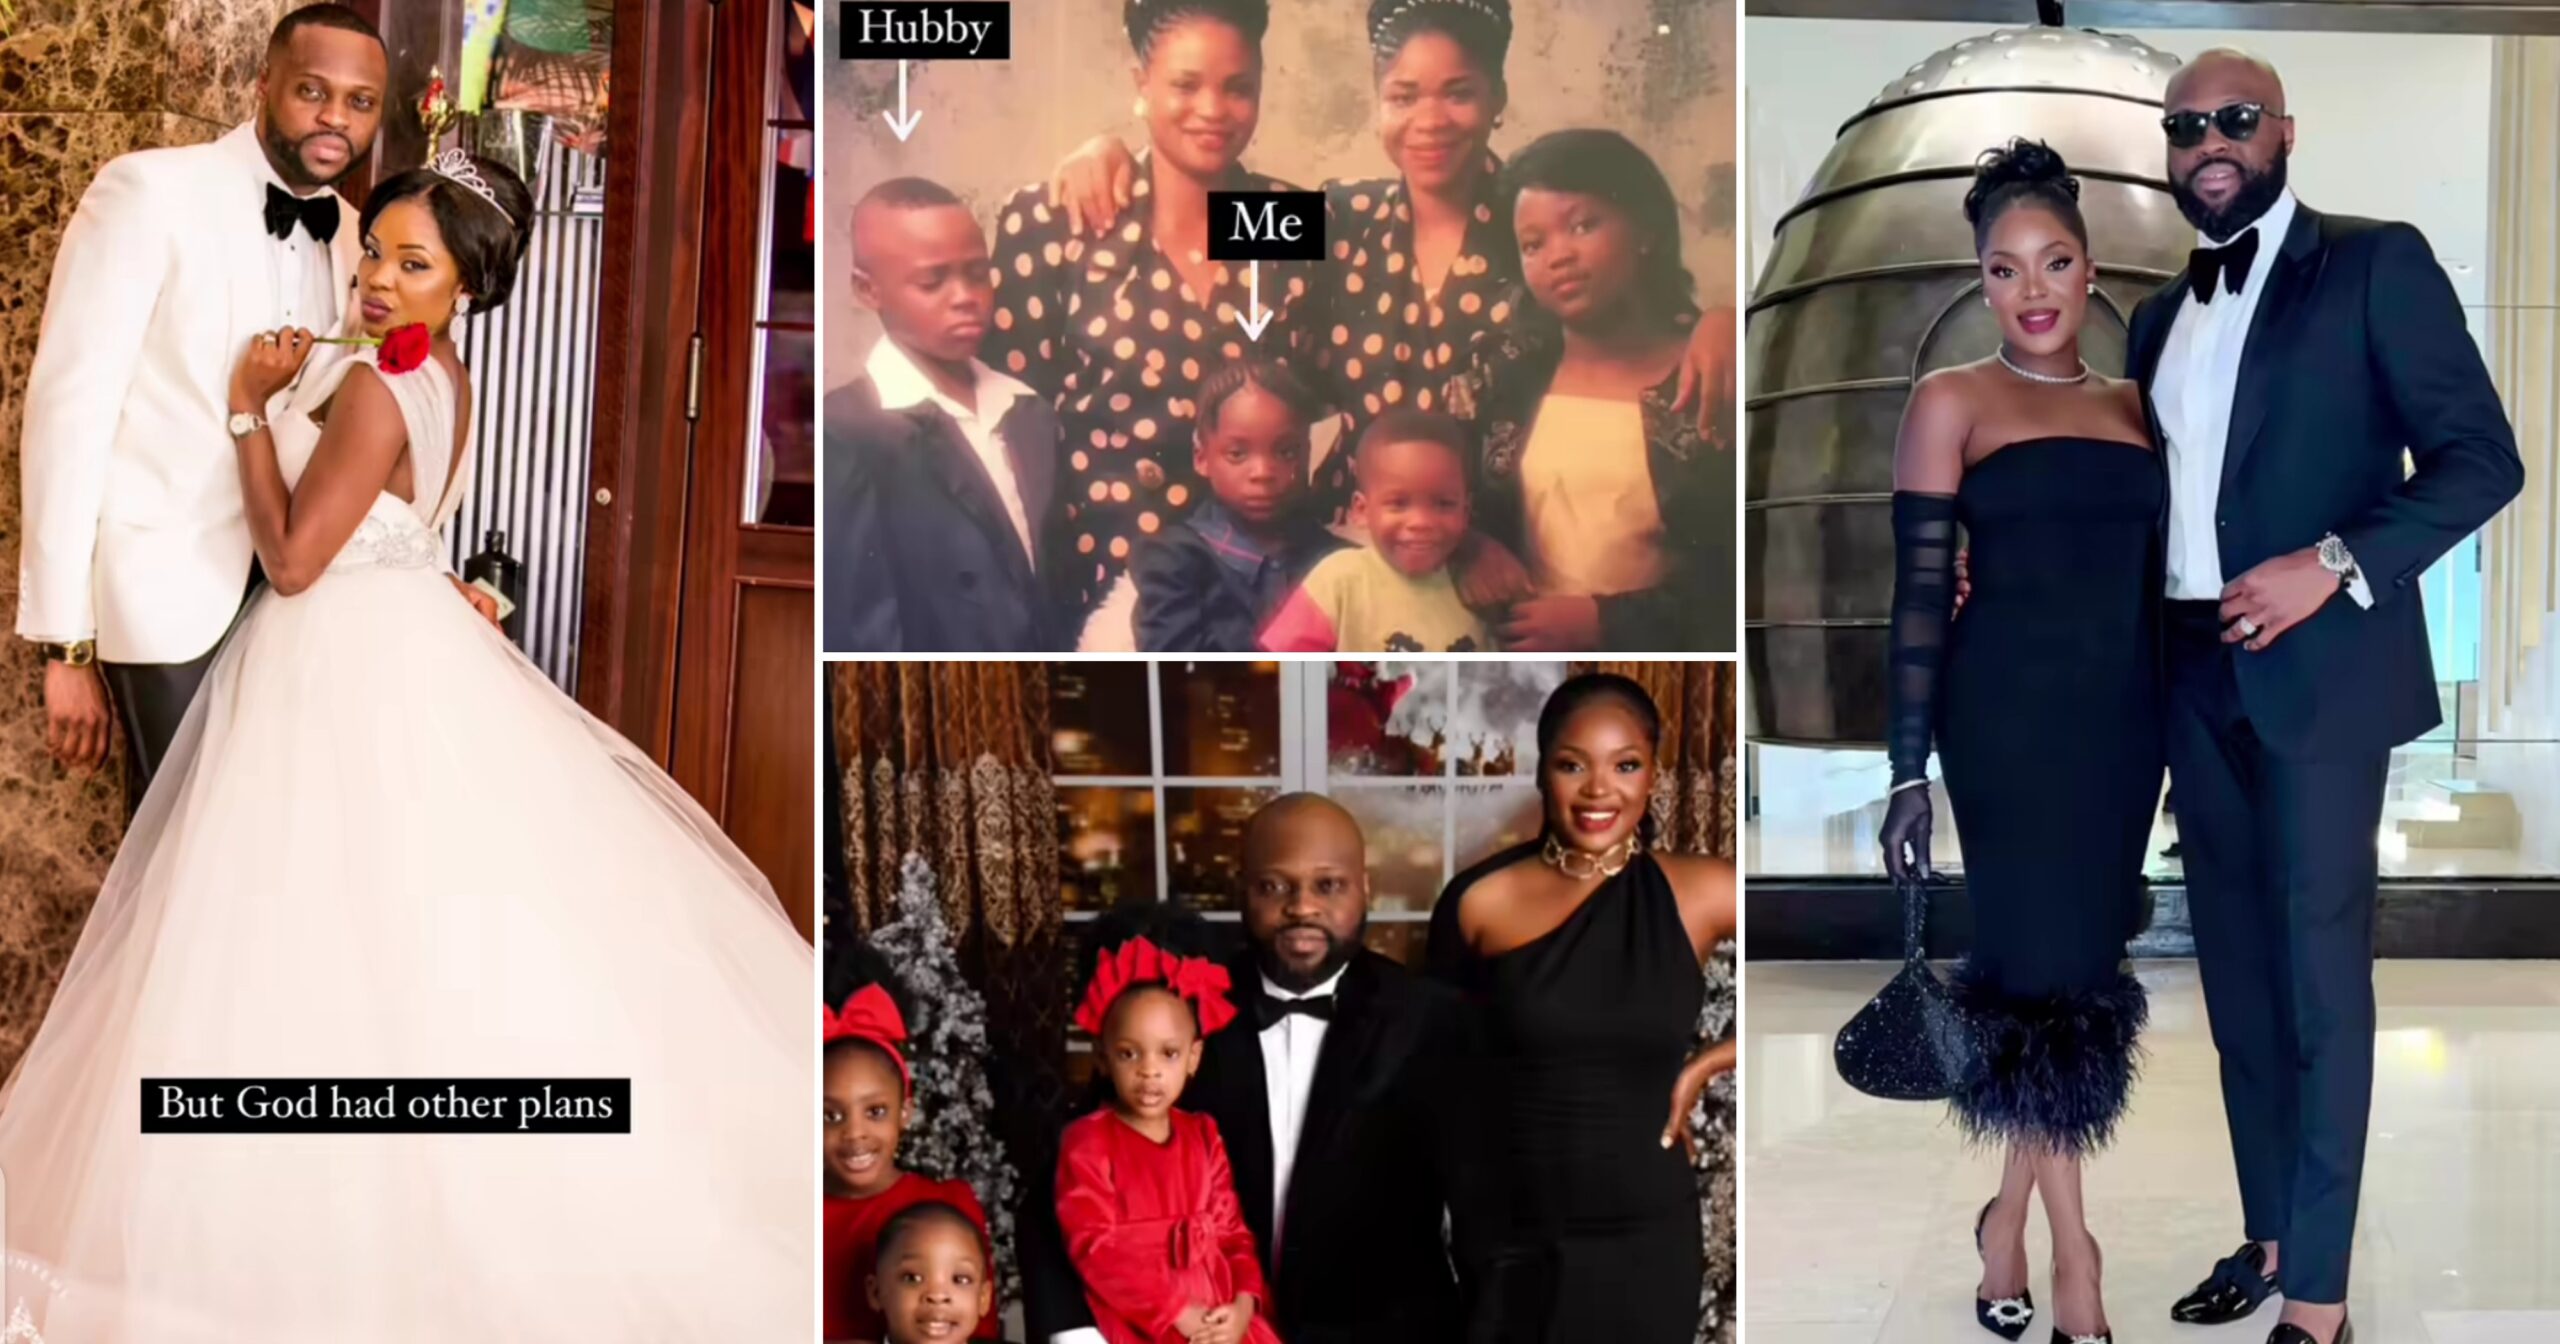 Lady shares love story as she ties the knot with childhood enemy